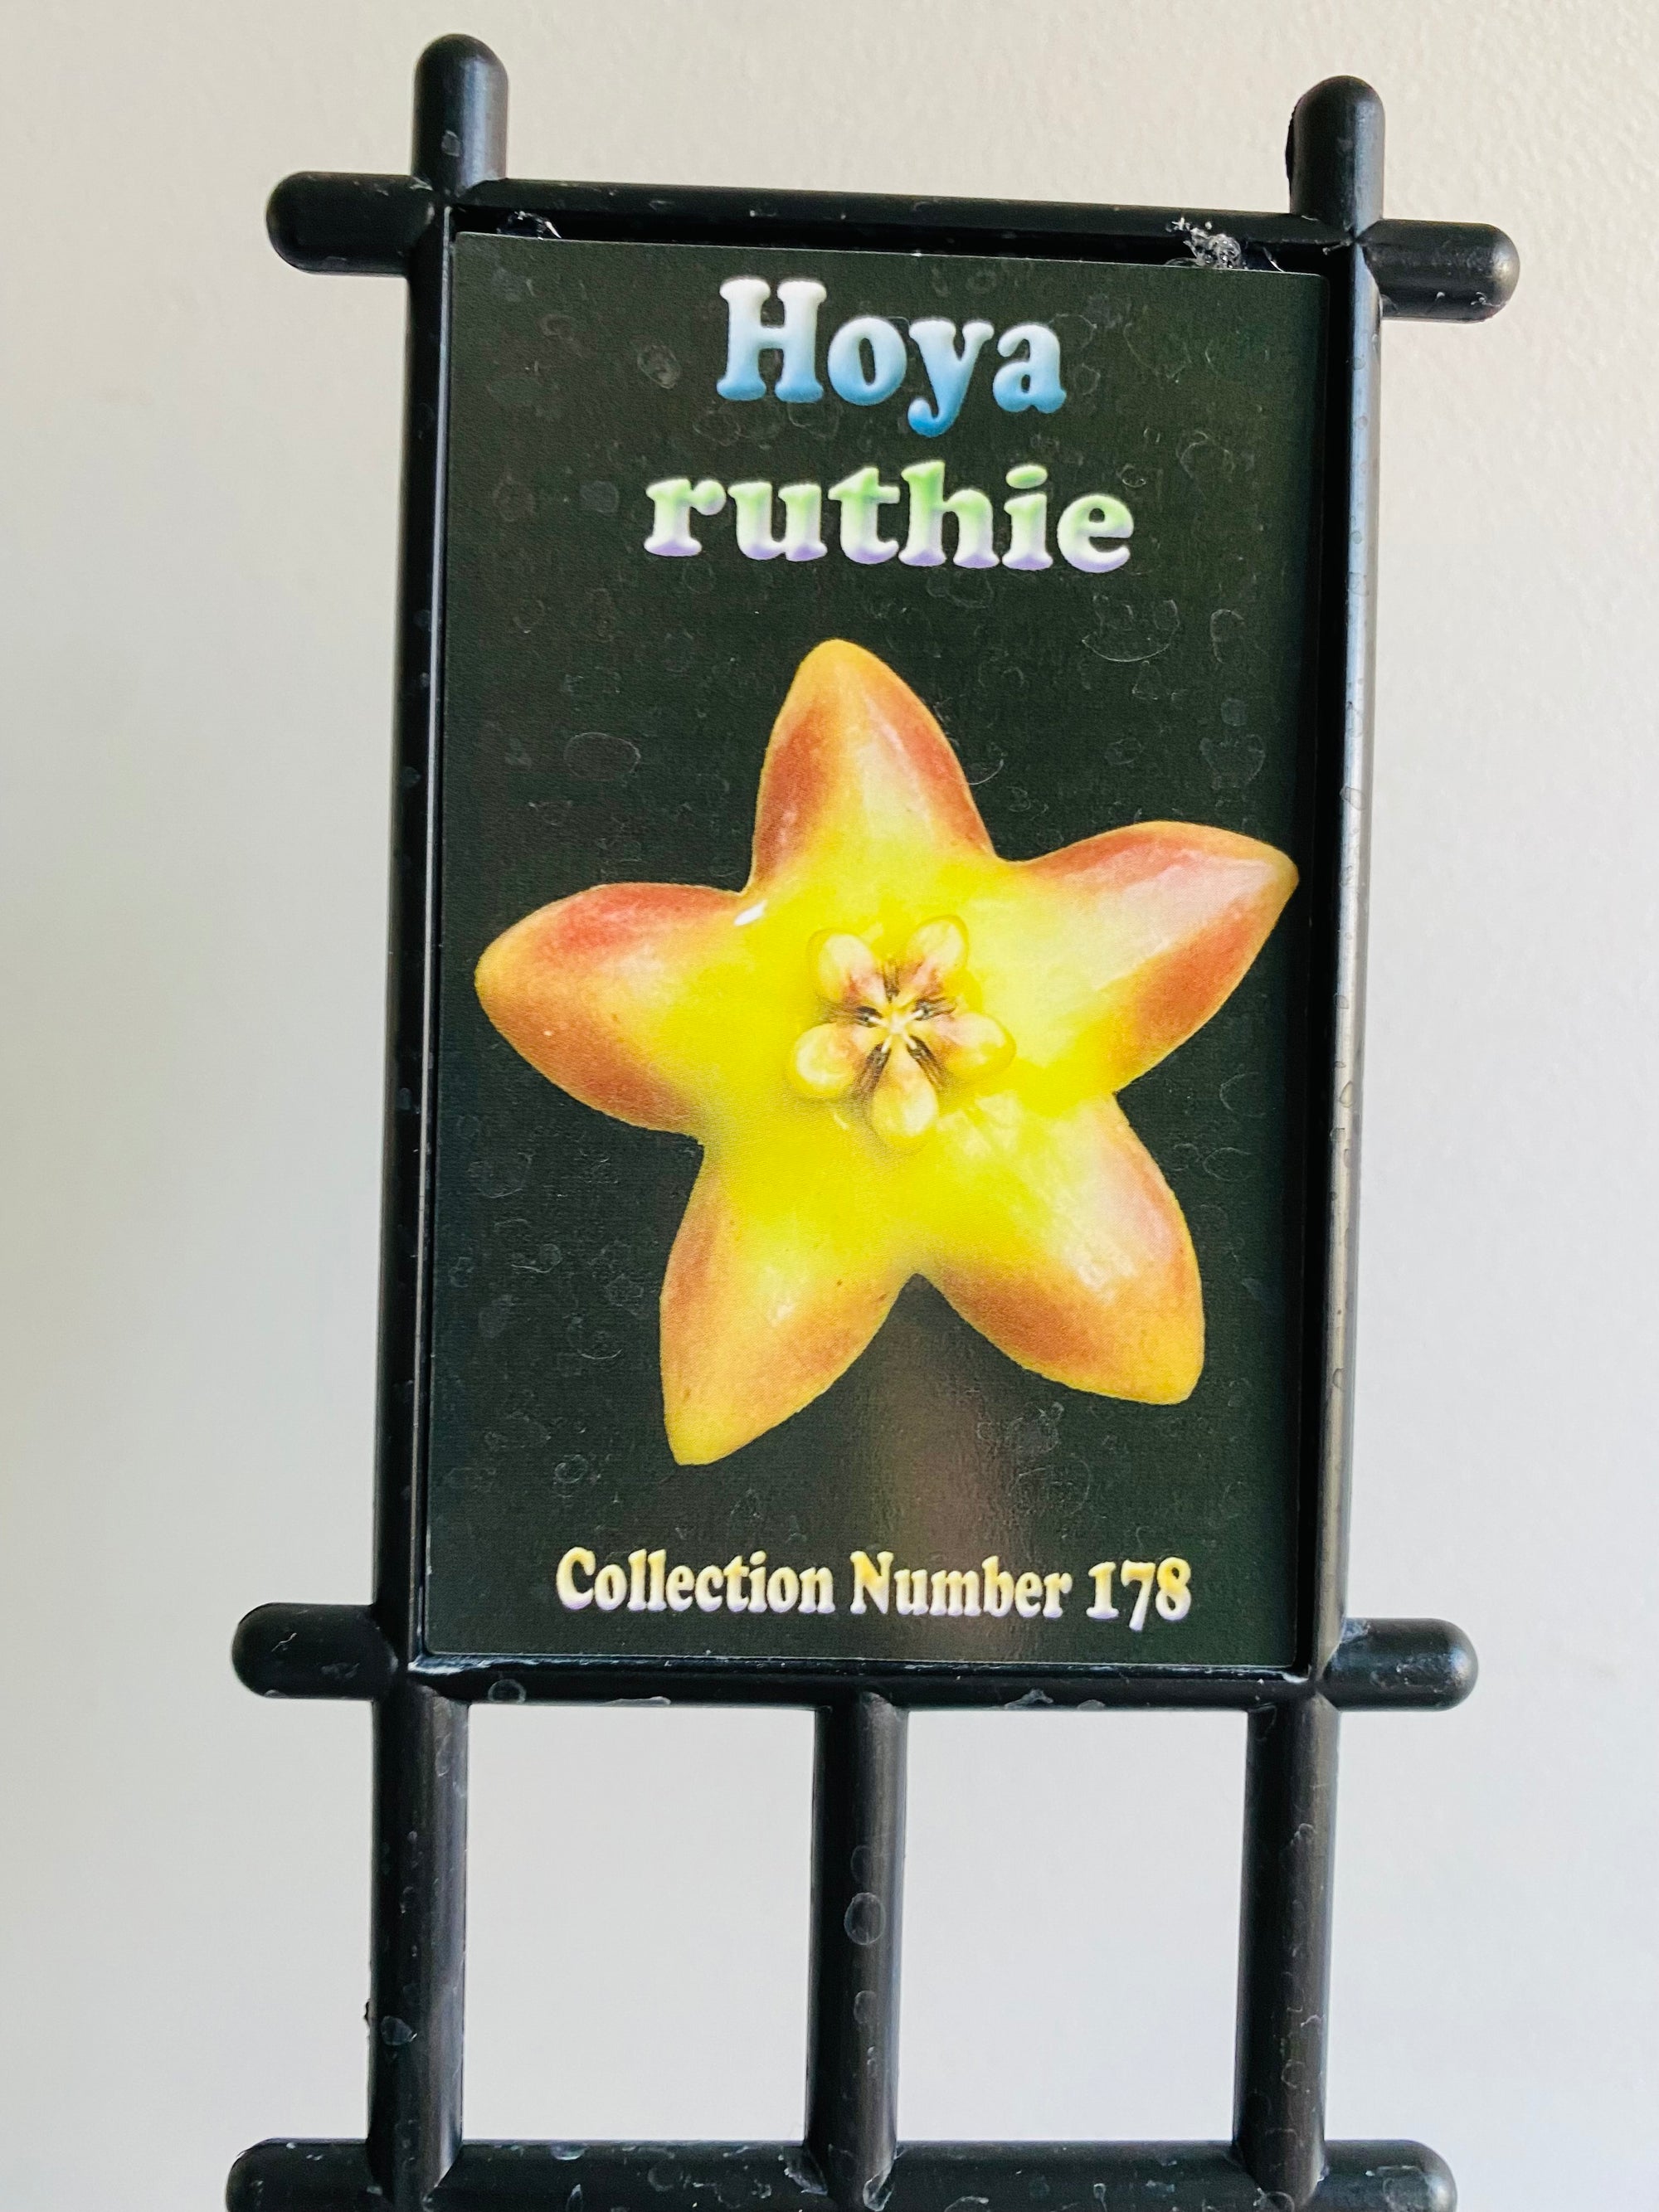 Hoya - Ruthie Collection No. 178